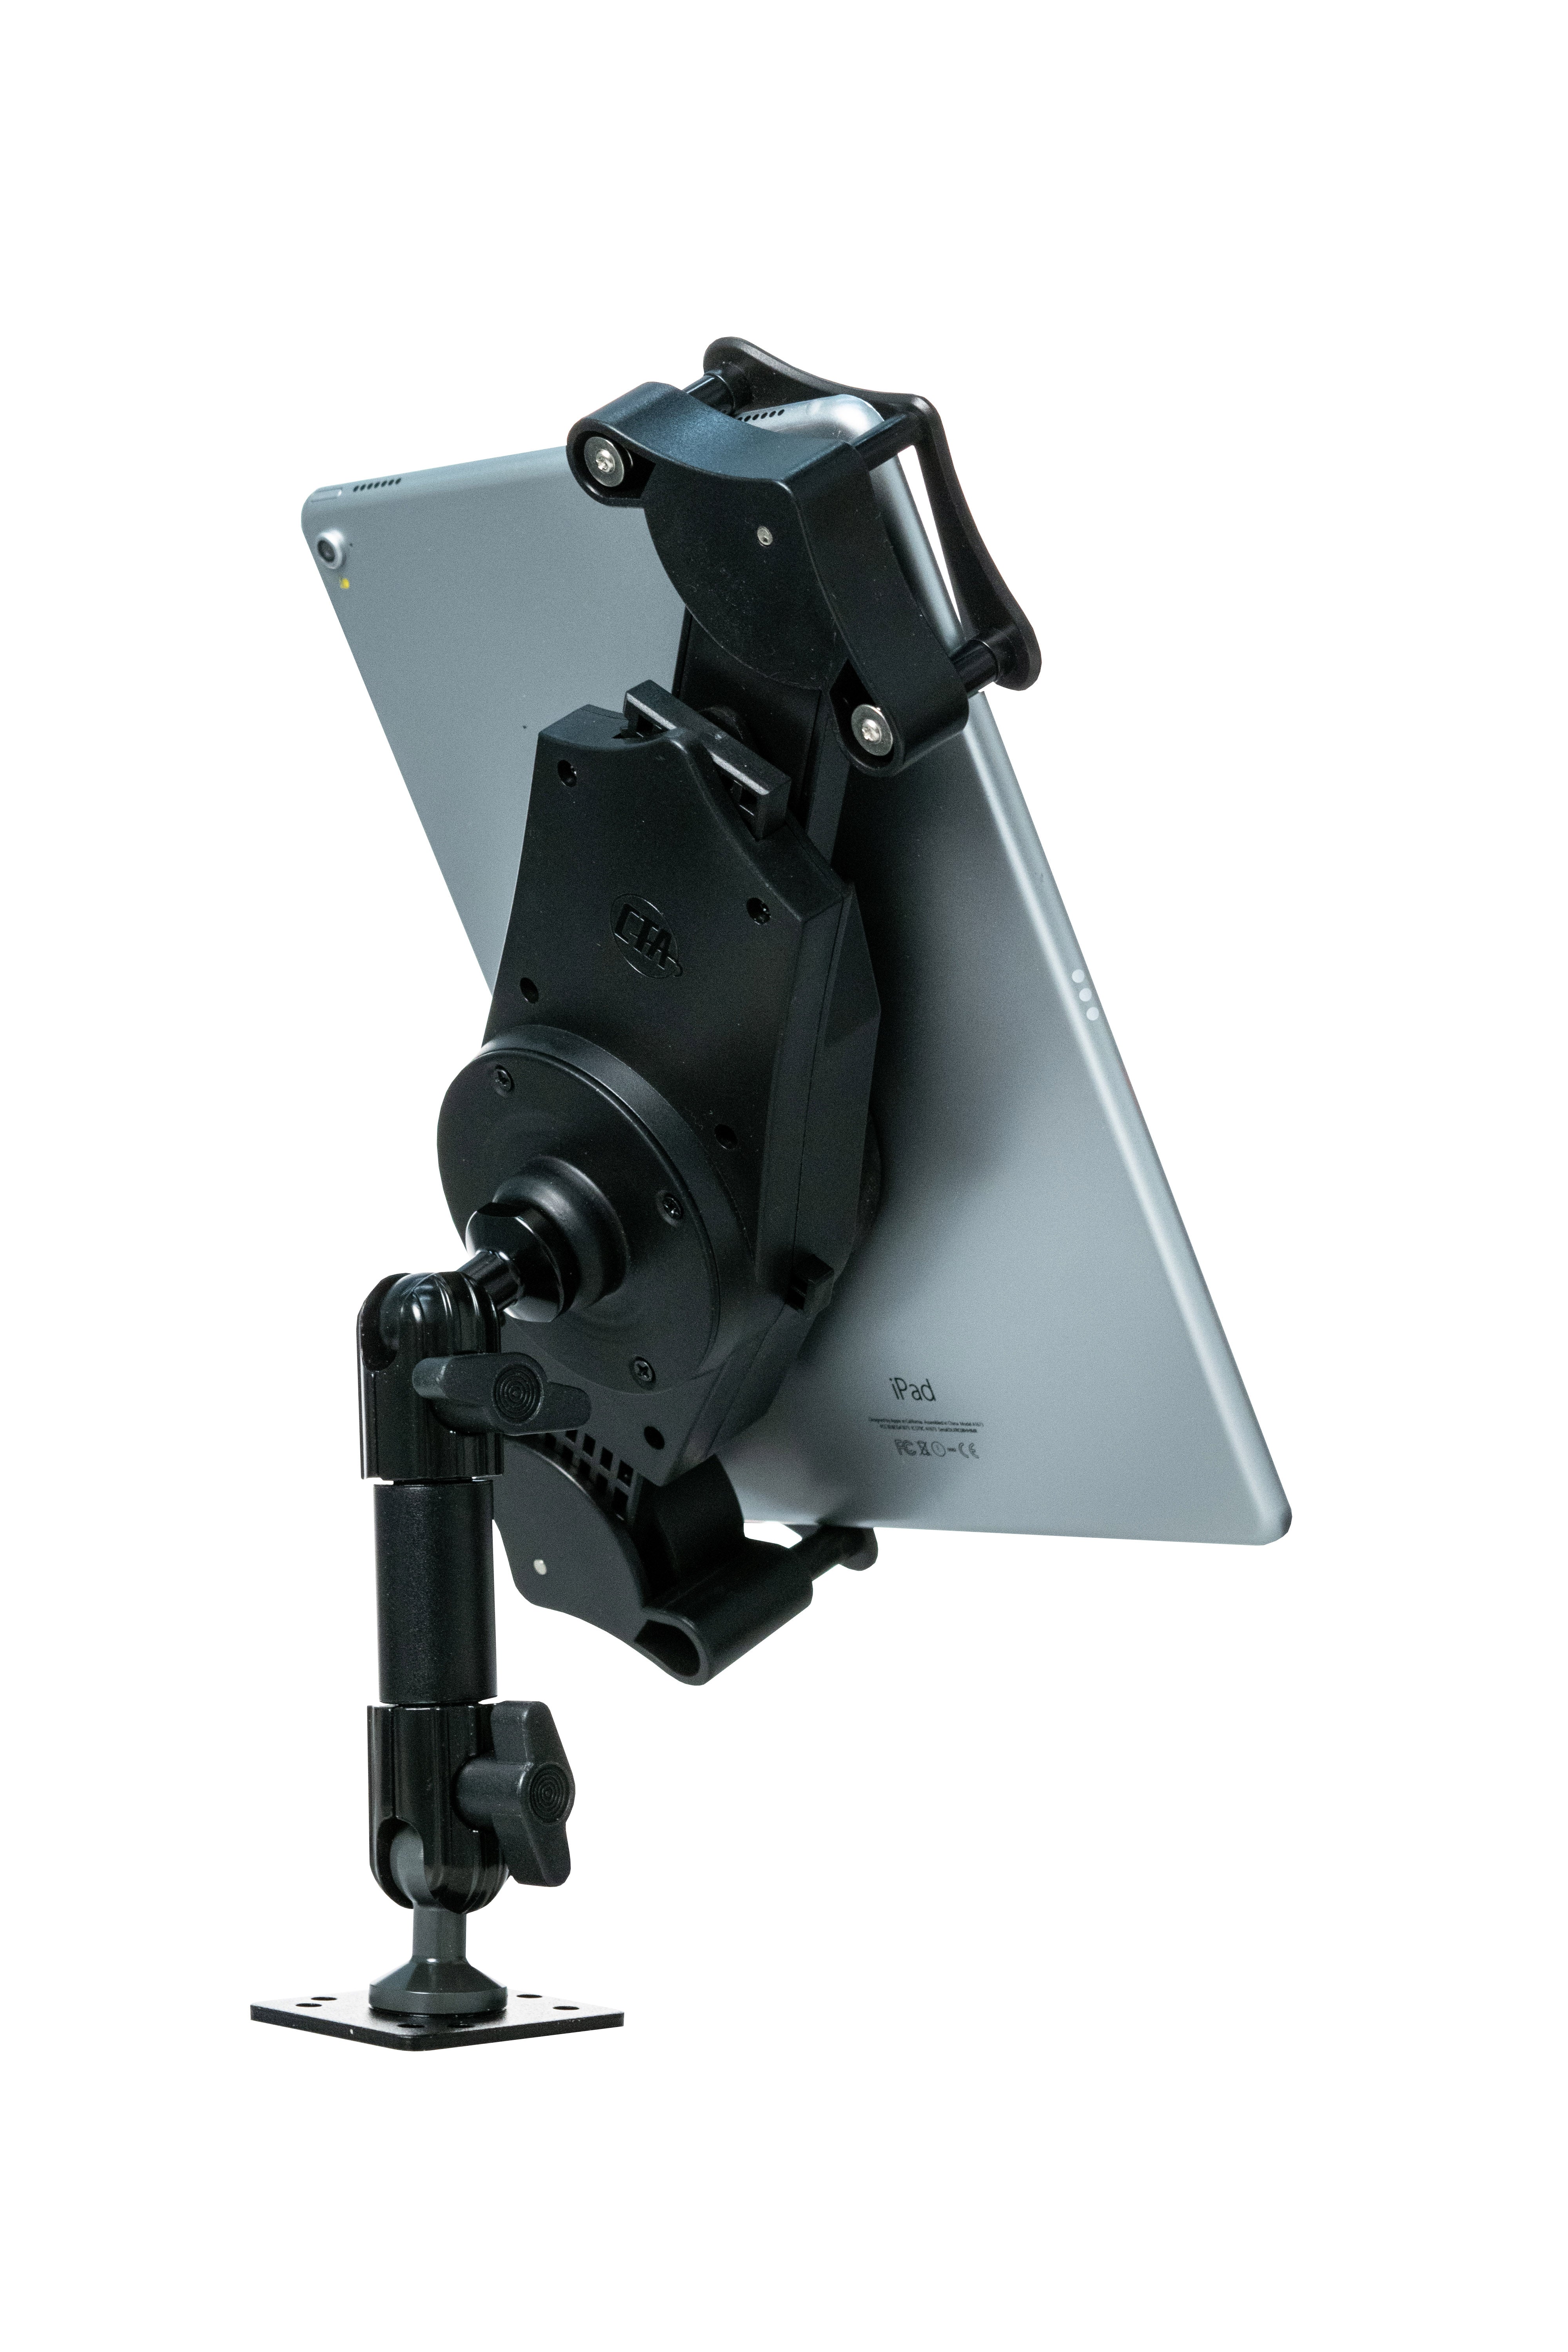 Dashboard, Tabletop, and Wall Mount for 7-14 Inch Tablets